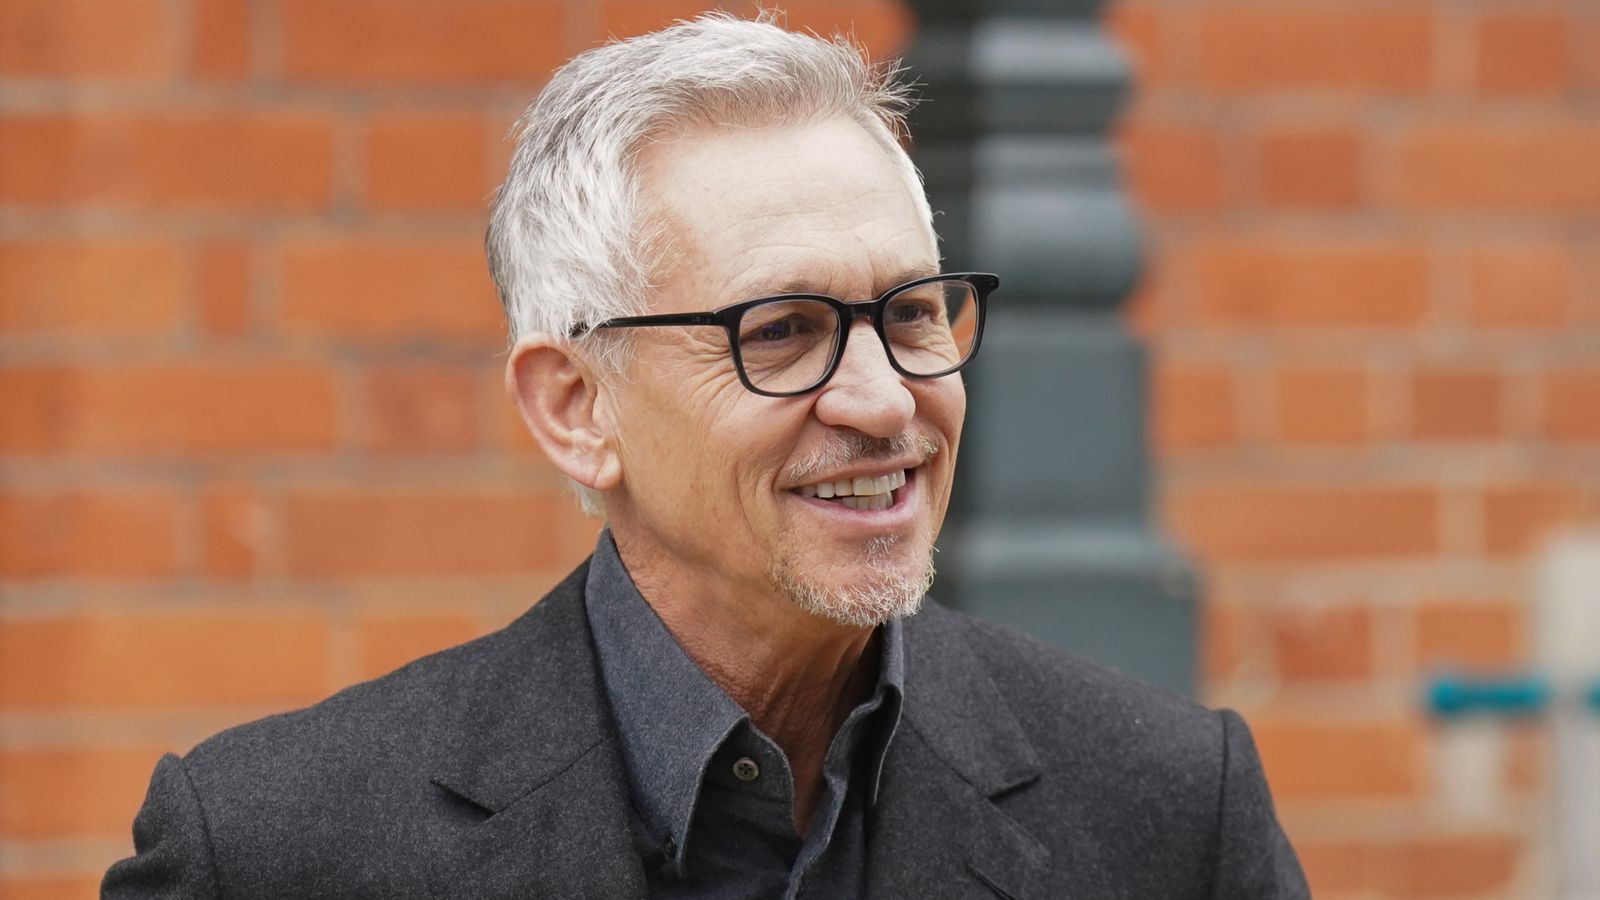 Gary Lineker forced out of role as Match of the Day presenter